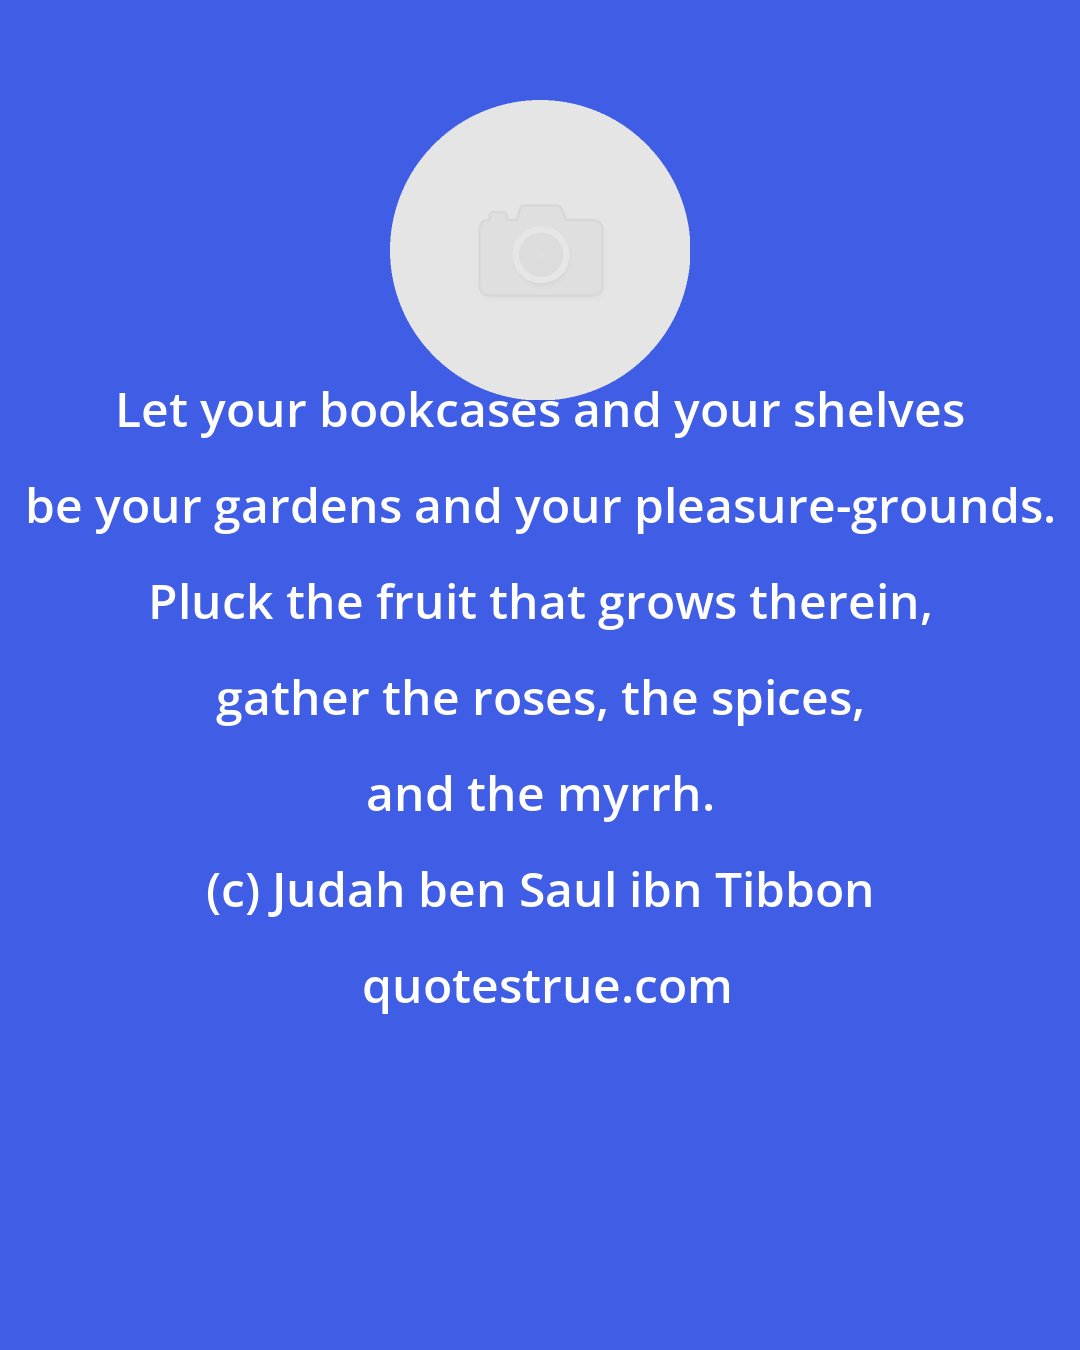 Judah ben Saul ibn Tibbon: Let your bookcases and your shelves be your gardens and your pleasure-grounds. Pluck the fruit that grows therein, gather the roses, the spices, and the myrrh.